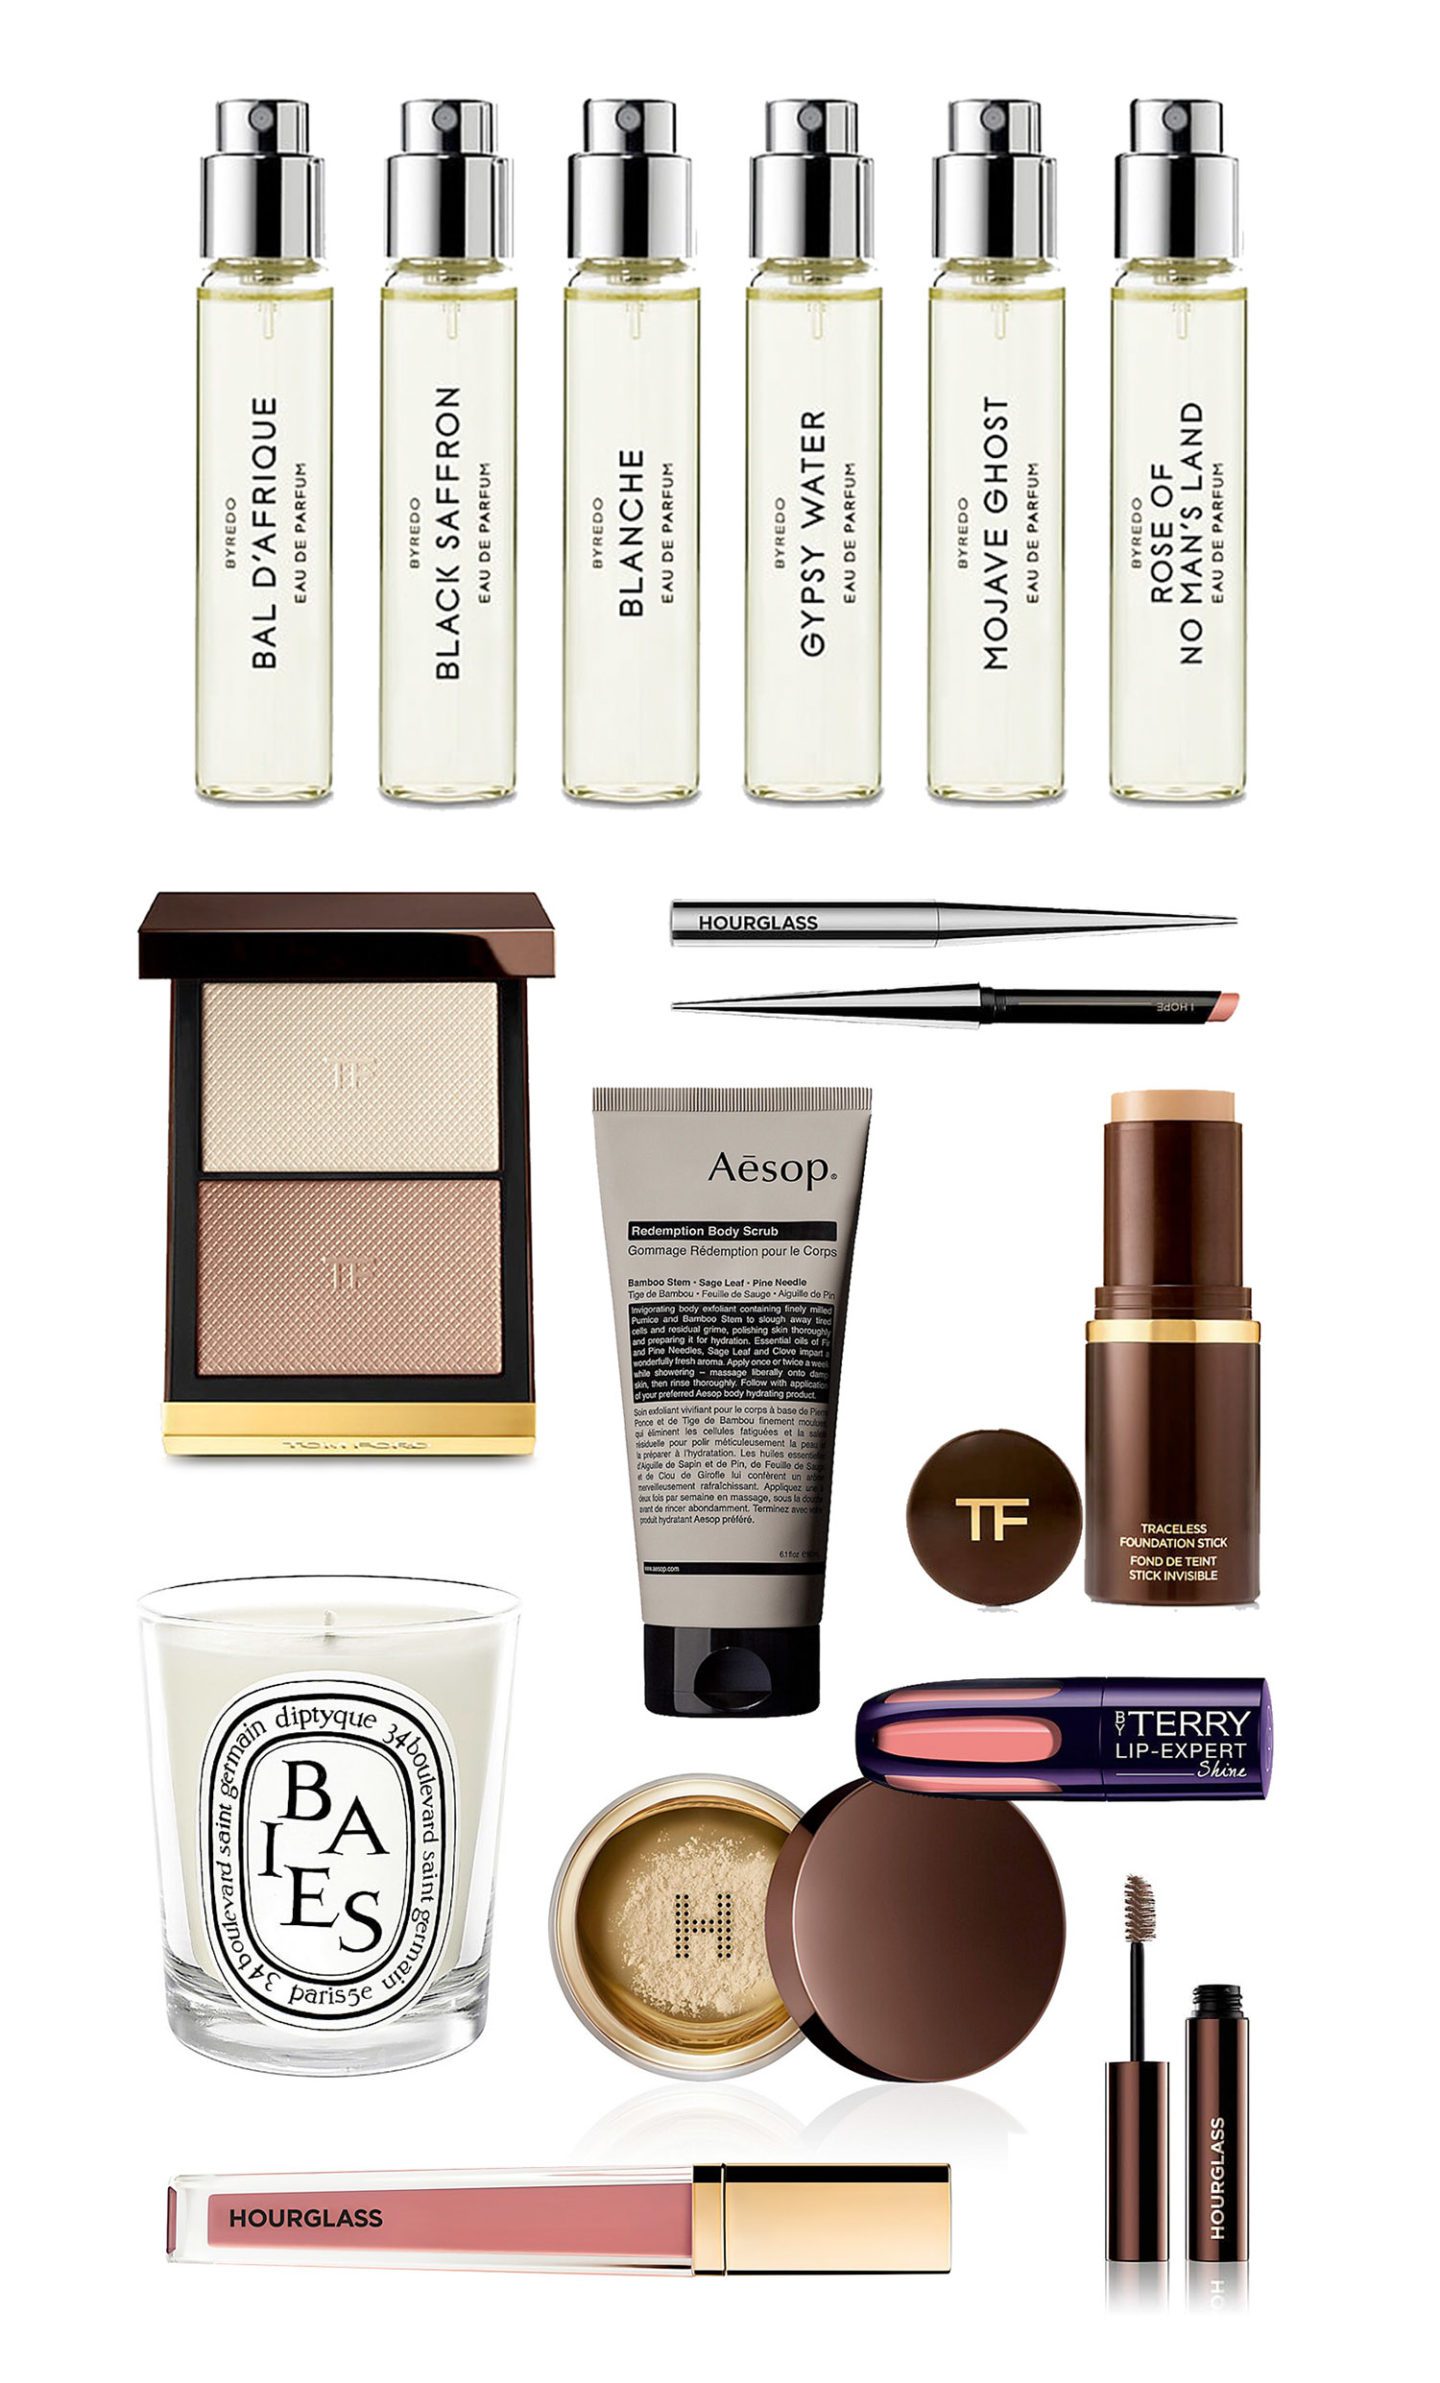 Beauty Favorites from Barneys Byredo, Diptyque, Aesop, Tom Ford